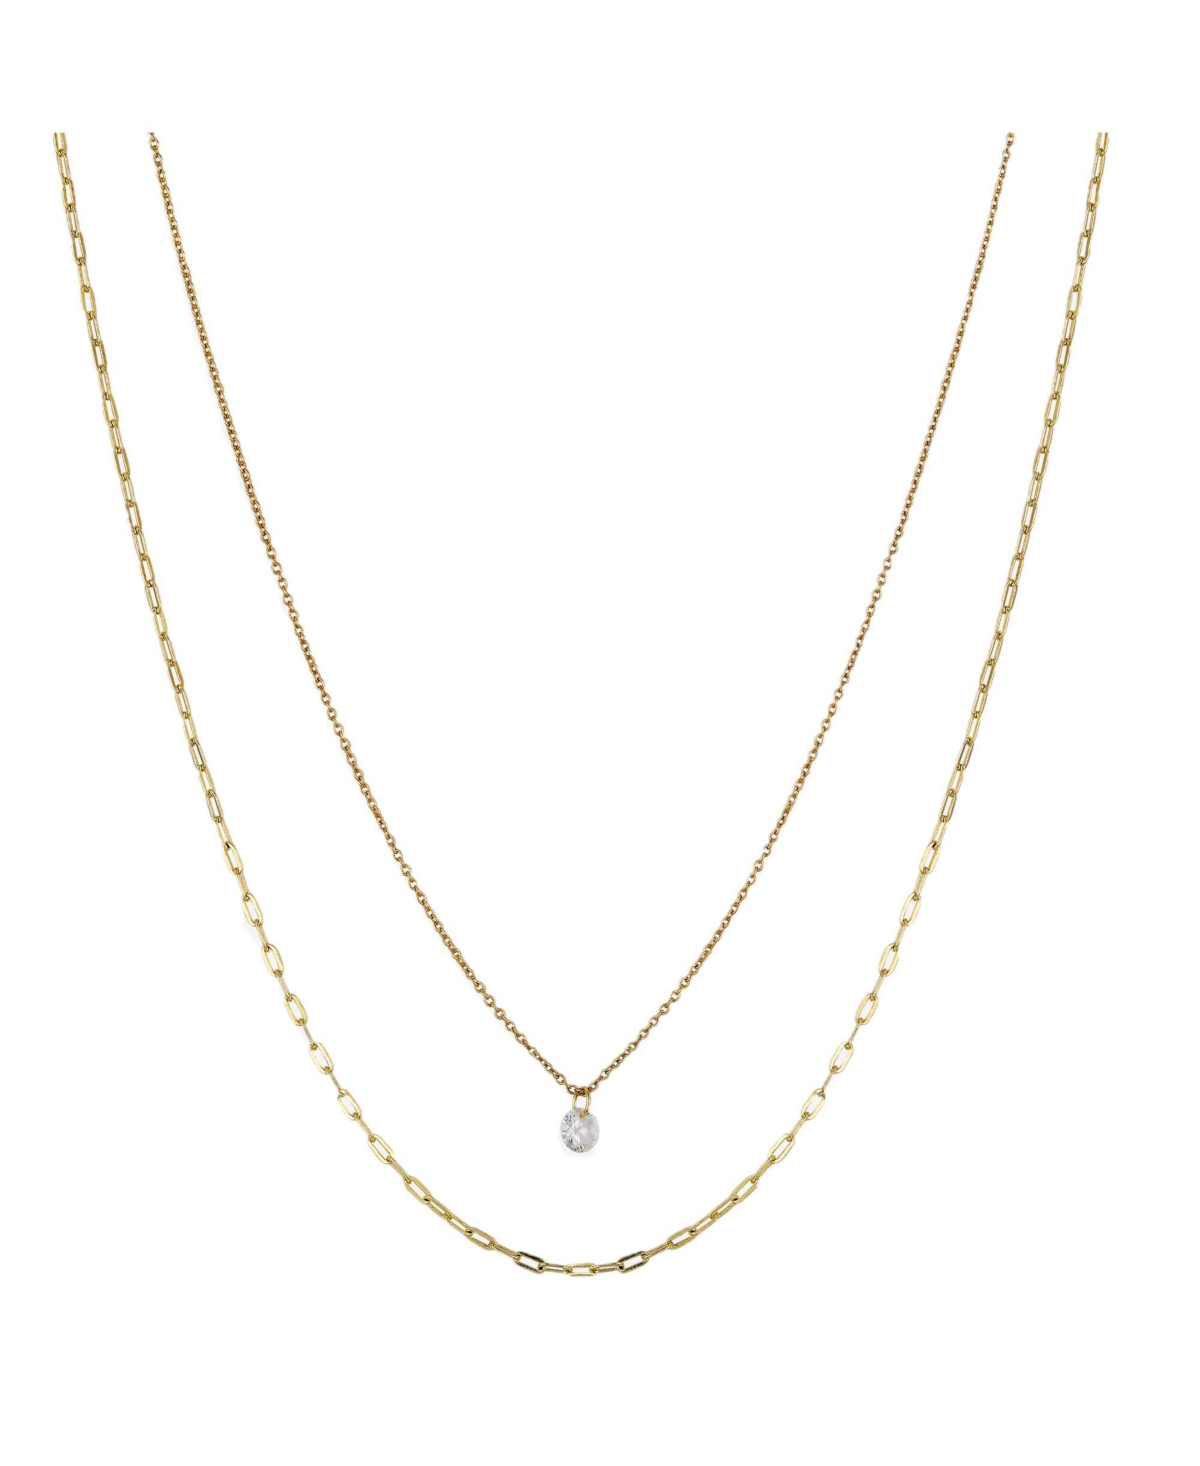 Modasport Clear Cubic Zirconia Stone Layered Necklace In Gold